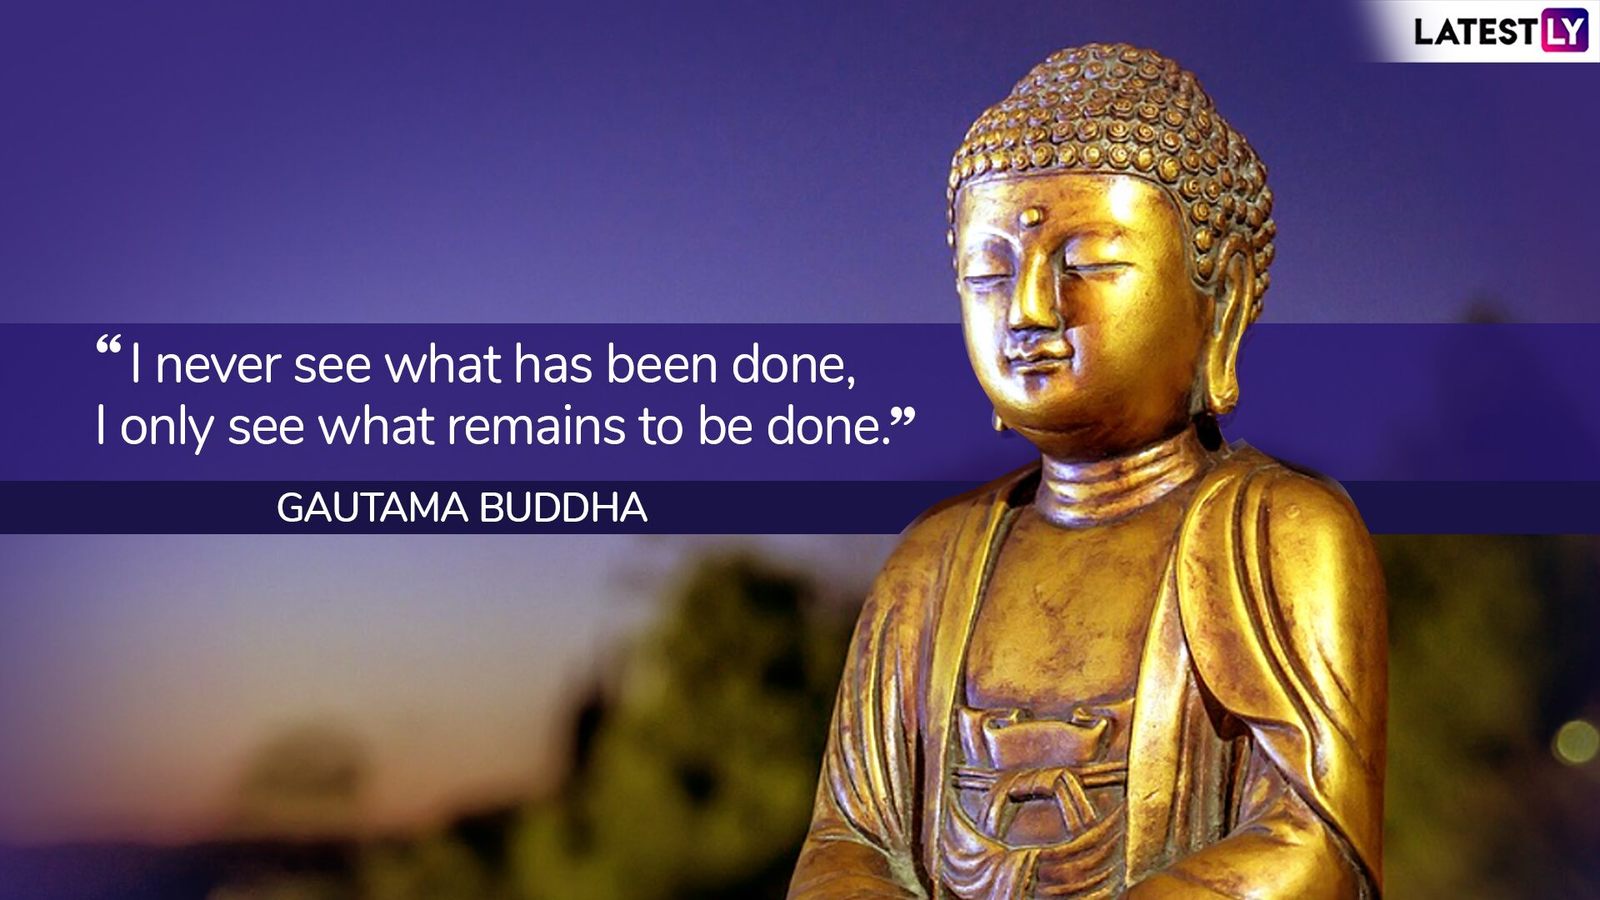 9-quotes-and-messages-share-these-inspirational-teachings-by-lord-buddha-to-celebrate-latestly-3.jpg